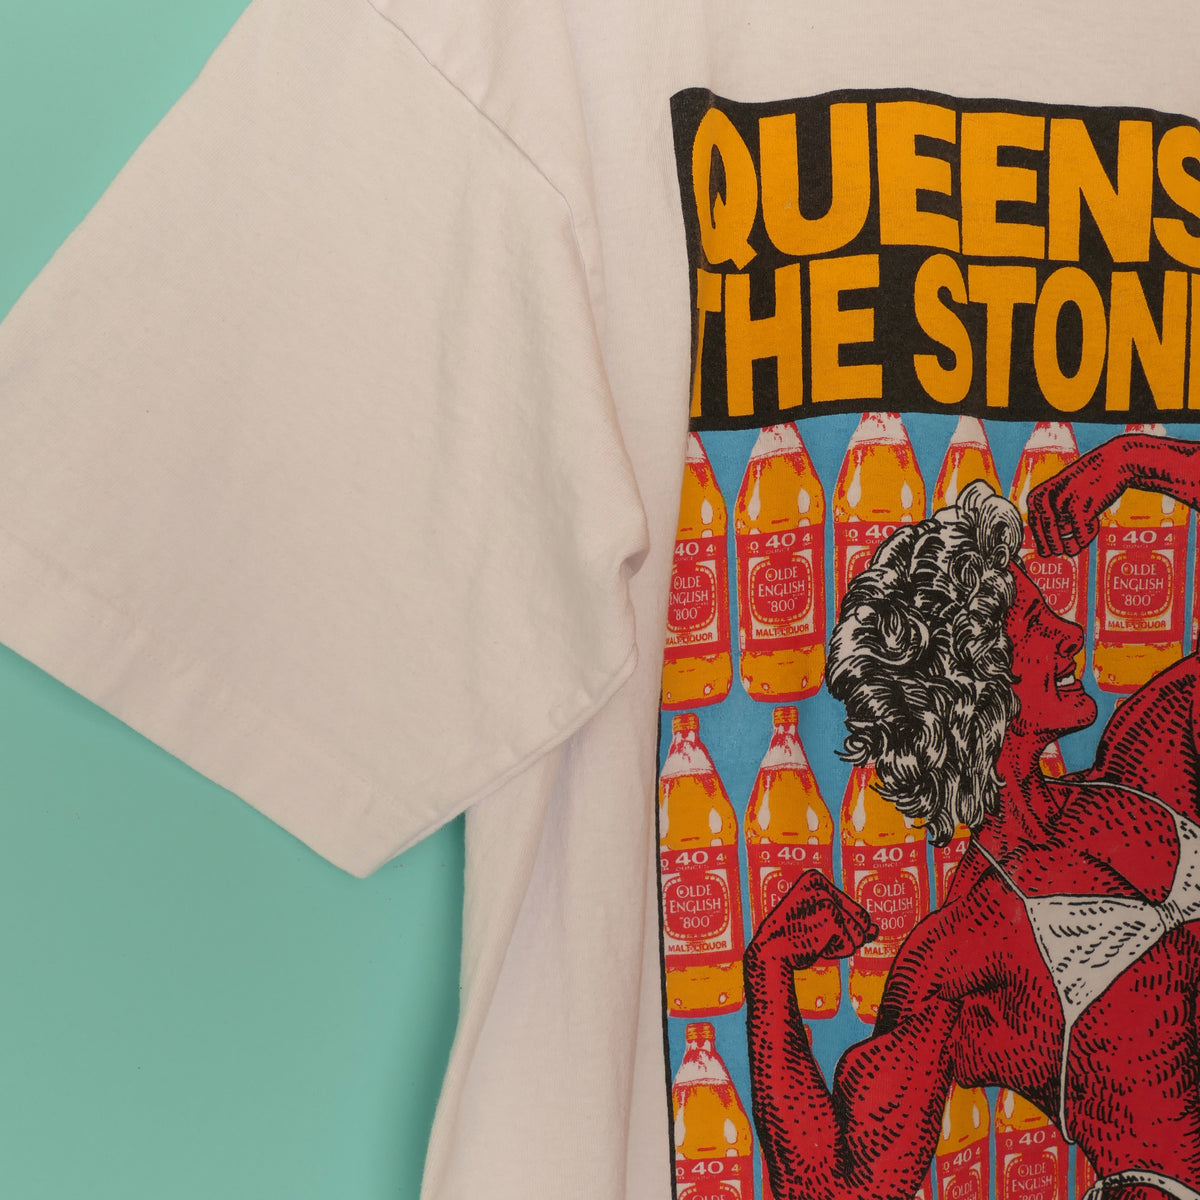 Queens of the Stone Age Tee